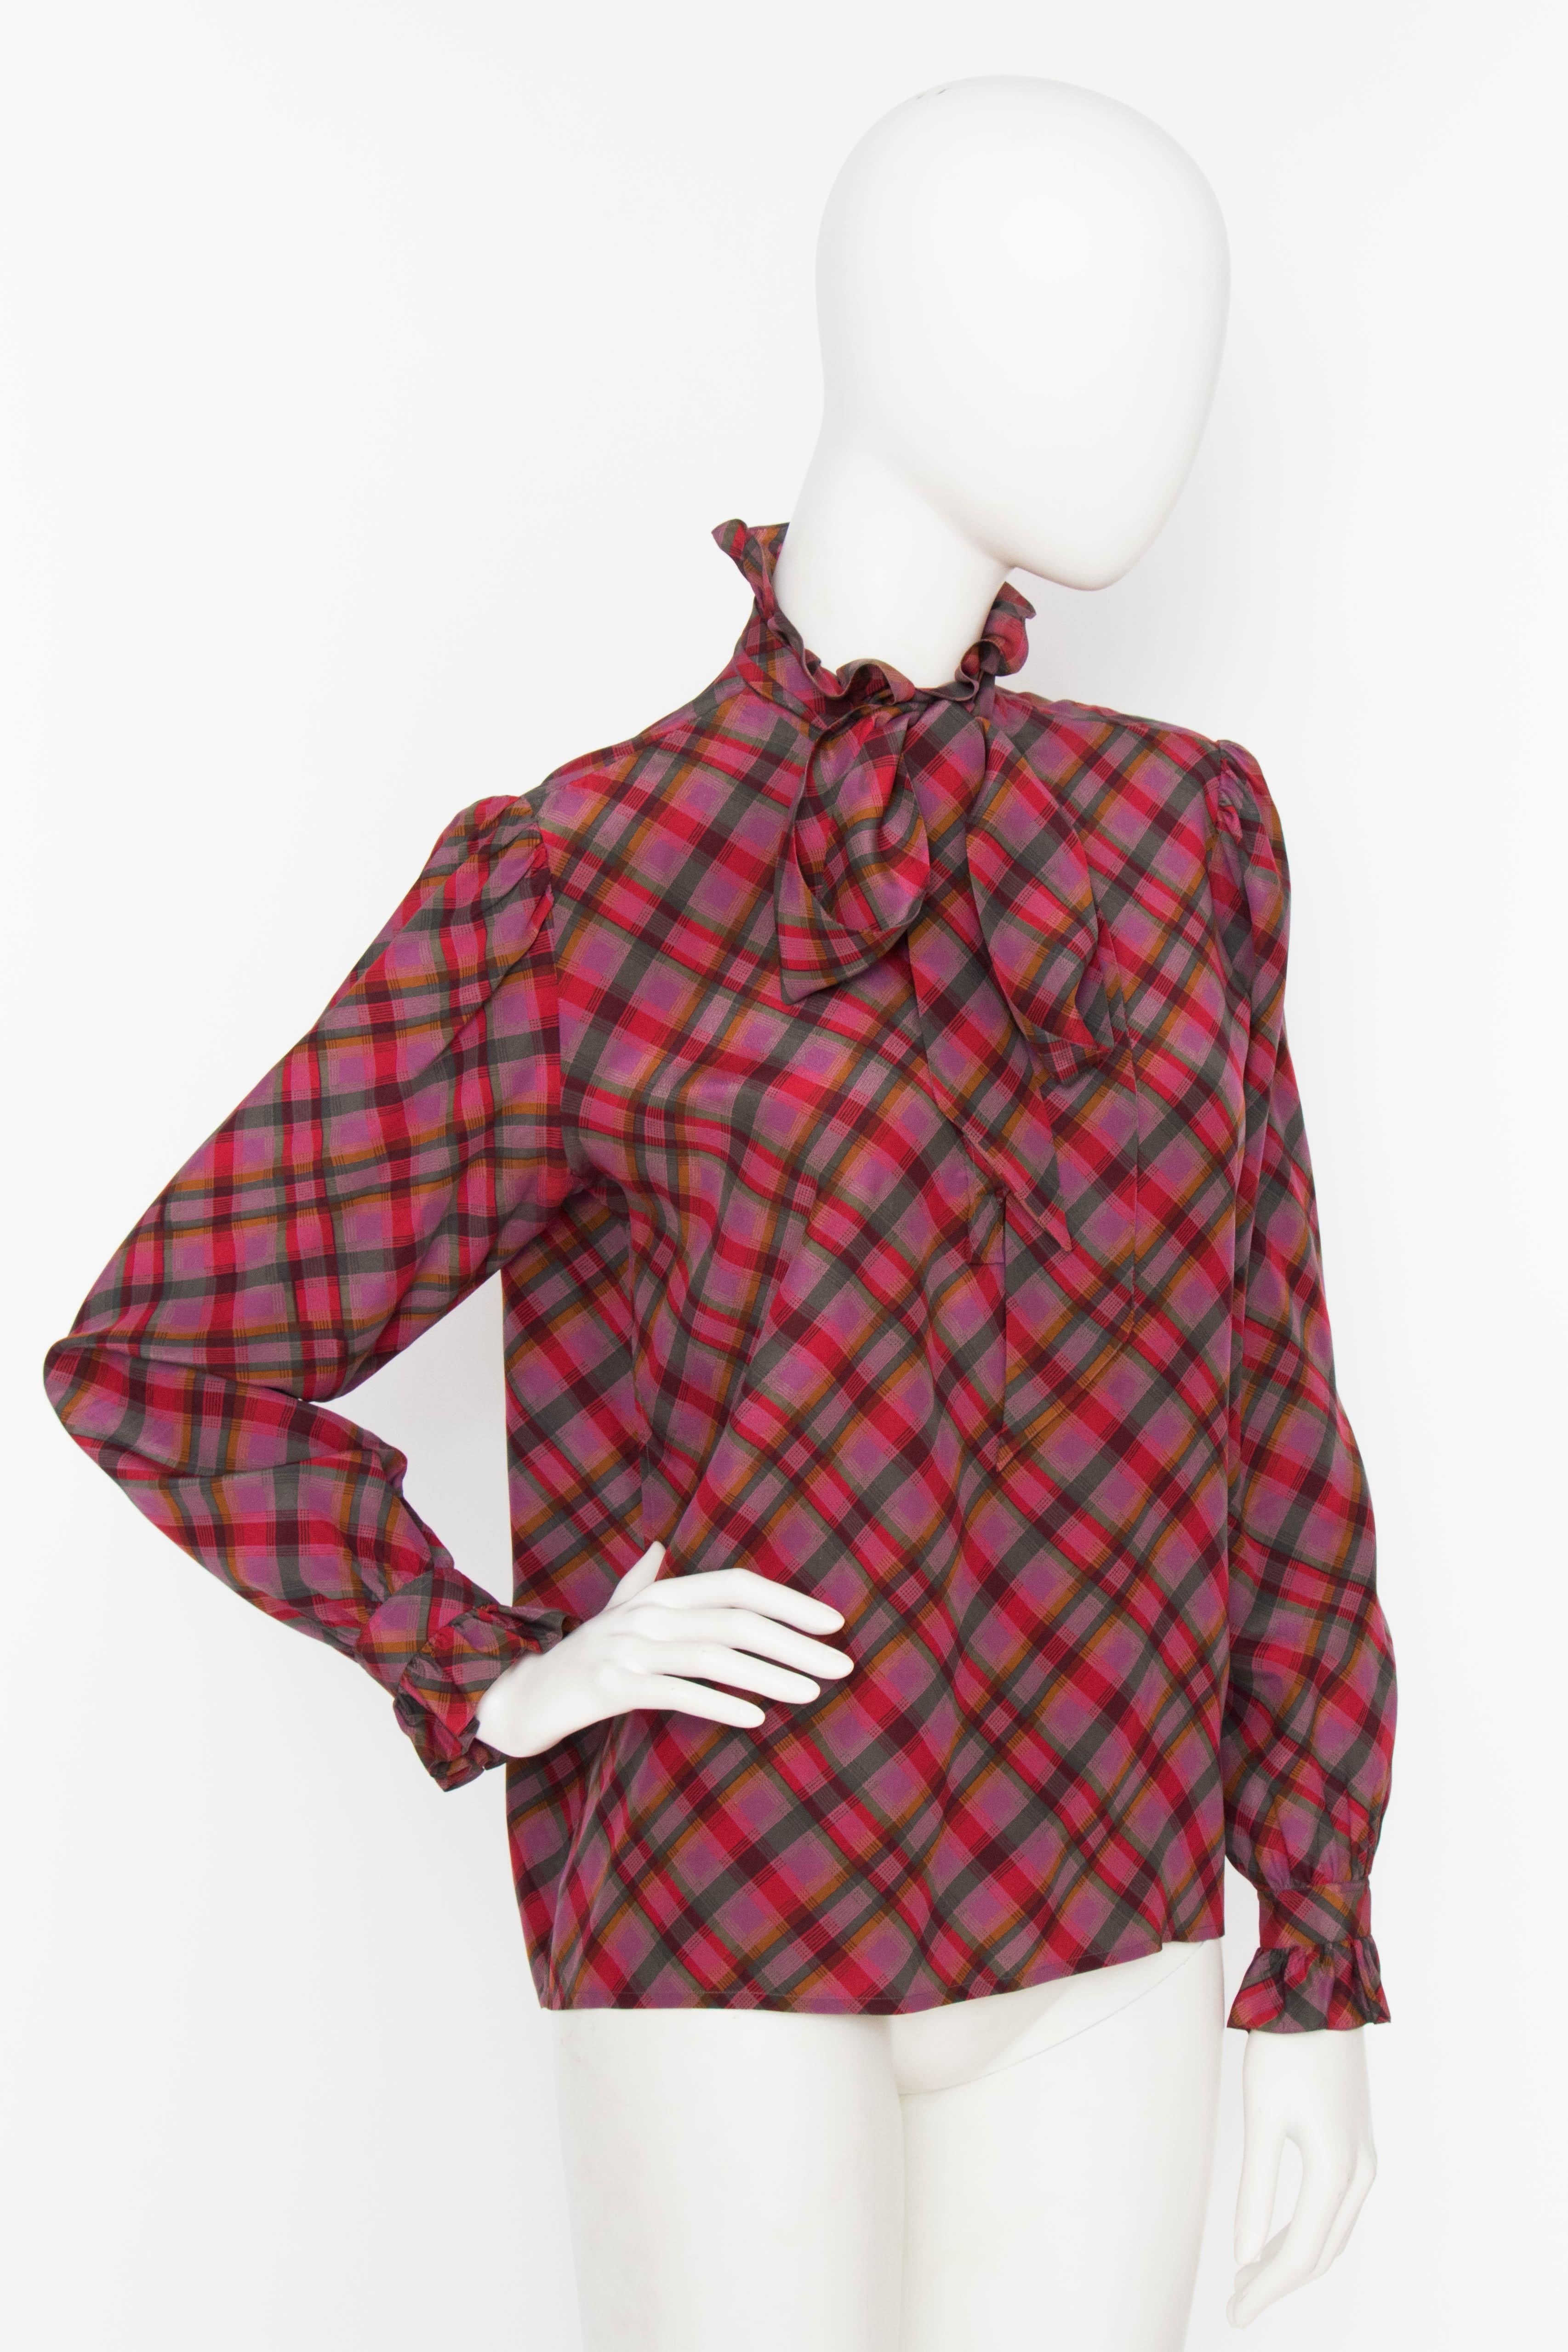 A 1970s Yves Saint Laurent Rive Gauche tartan silk blouse with a ruffle collar and ruffle trimmed cuffs. The shoulders are slightly puffed and a ribbon is attached to the collar. 

The size of the blouse corresponds to a modern size Extra Small.